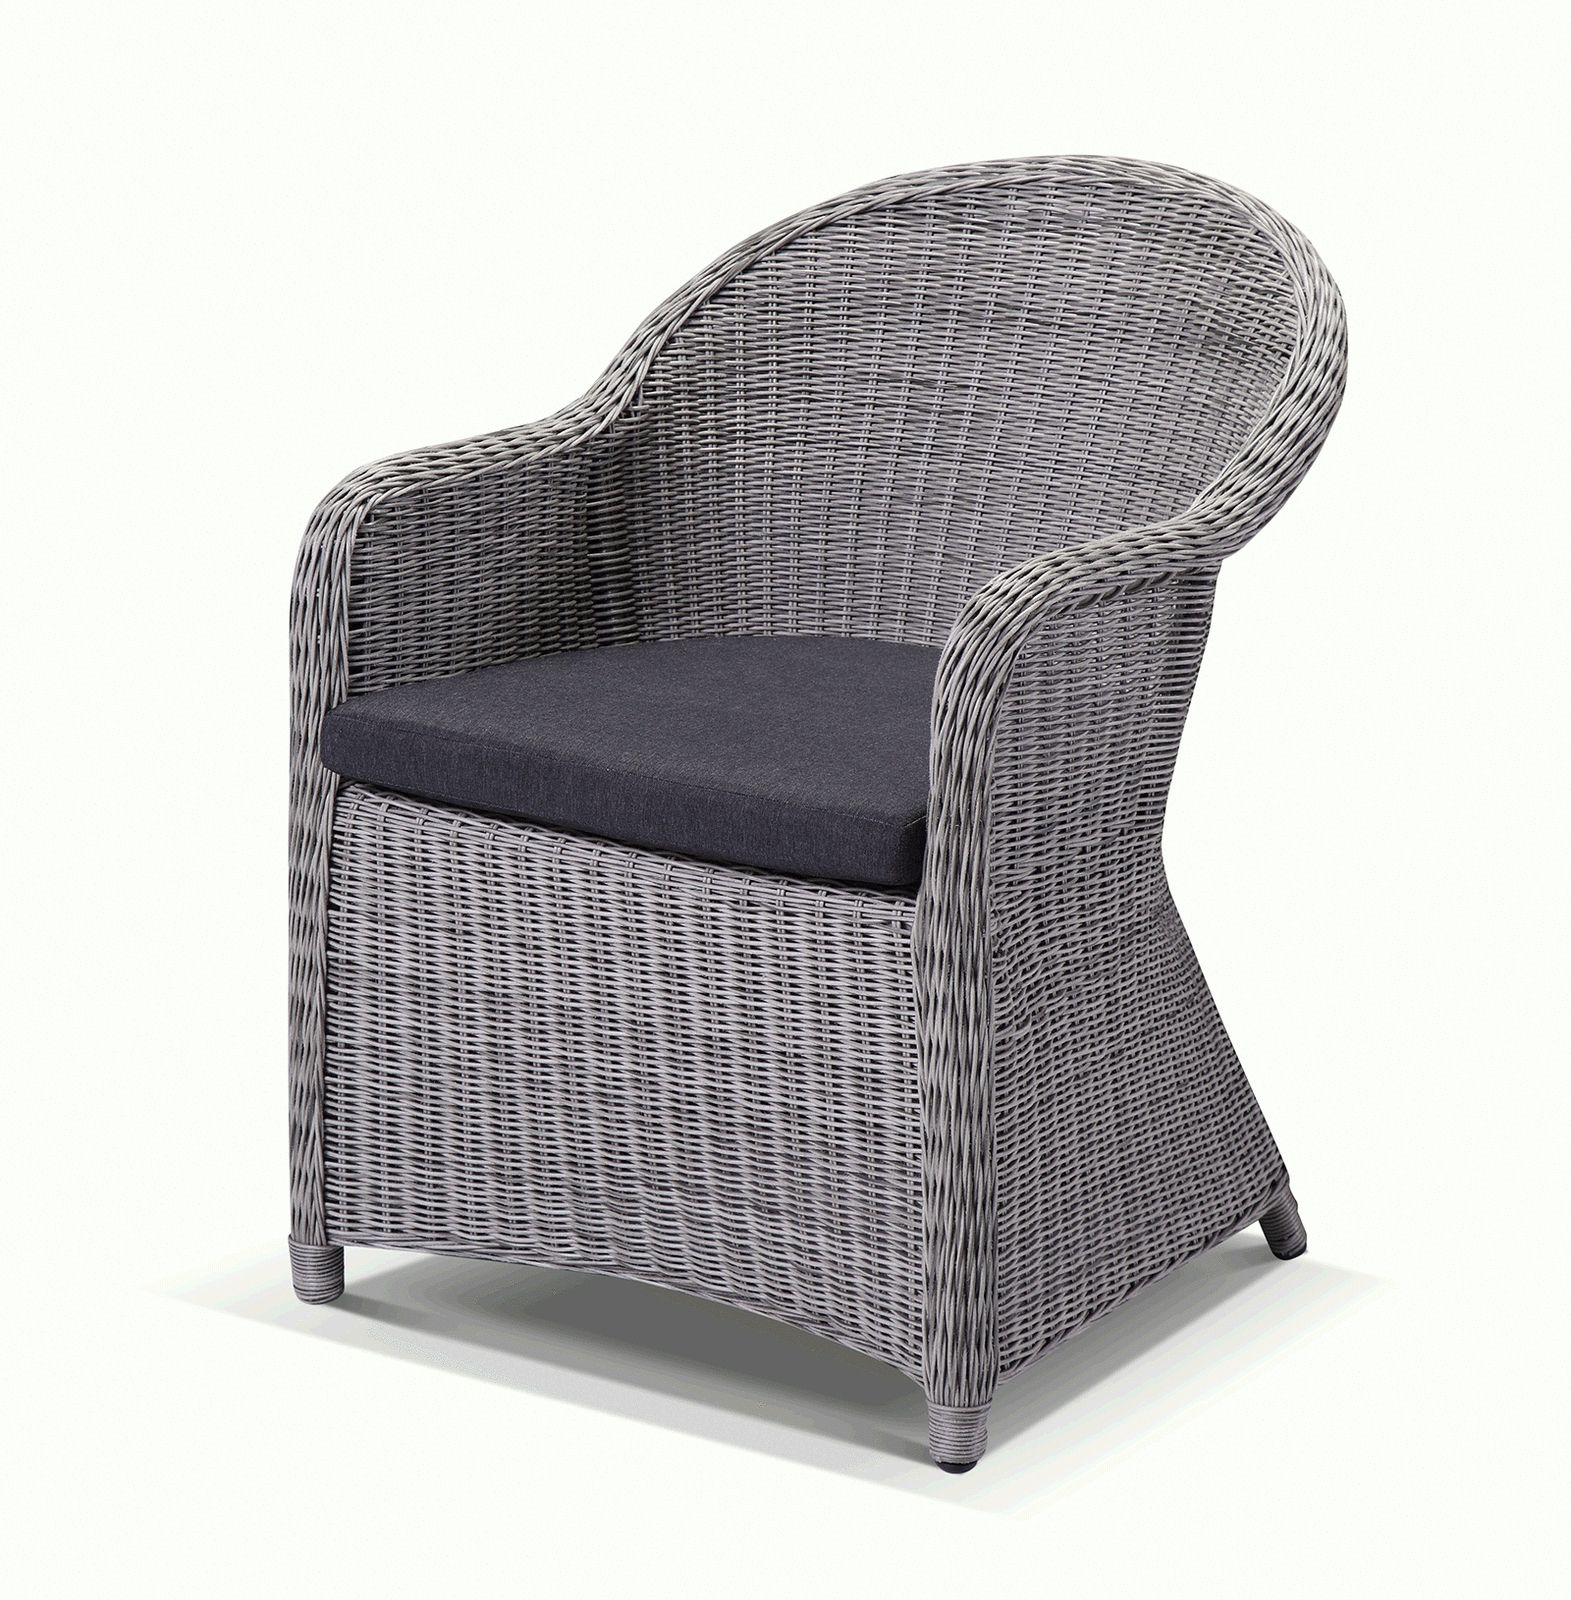 New Grey Outdoor Wicker Rattan Cane Dining Arm Chair Patio Cane Rattan Throughout Well Known Rattan Wicker Outdoor Seating Sets (View 14 of 15)